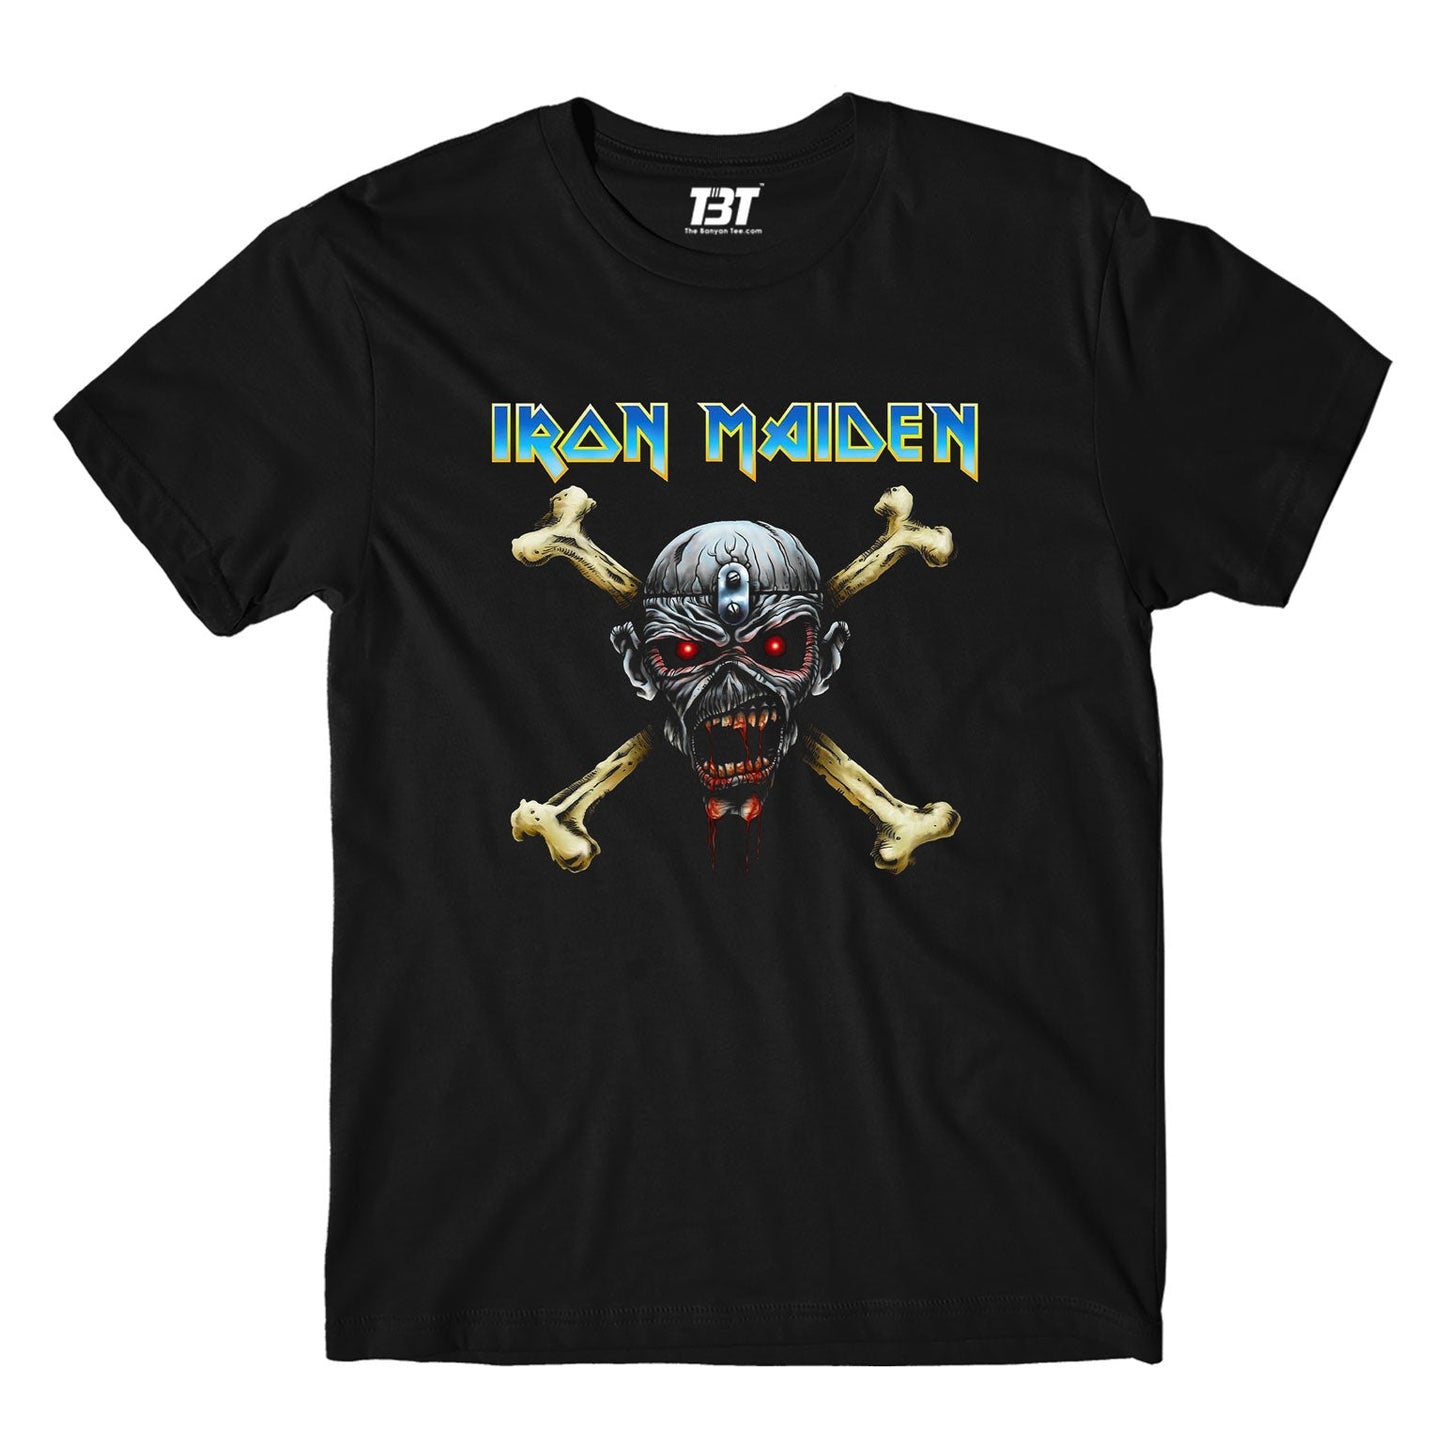 the banyan tee merch on sale Iron Maiden T shirt - On Sale - XS (Chest size 36 IN)